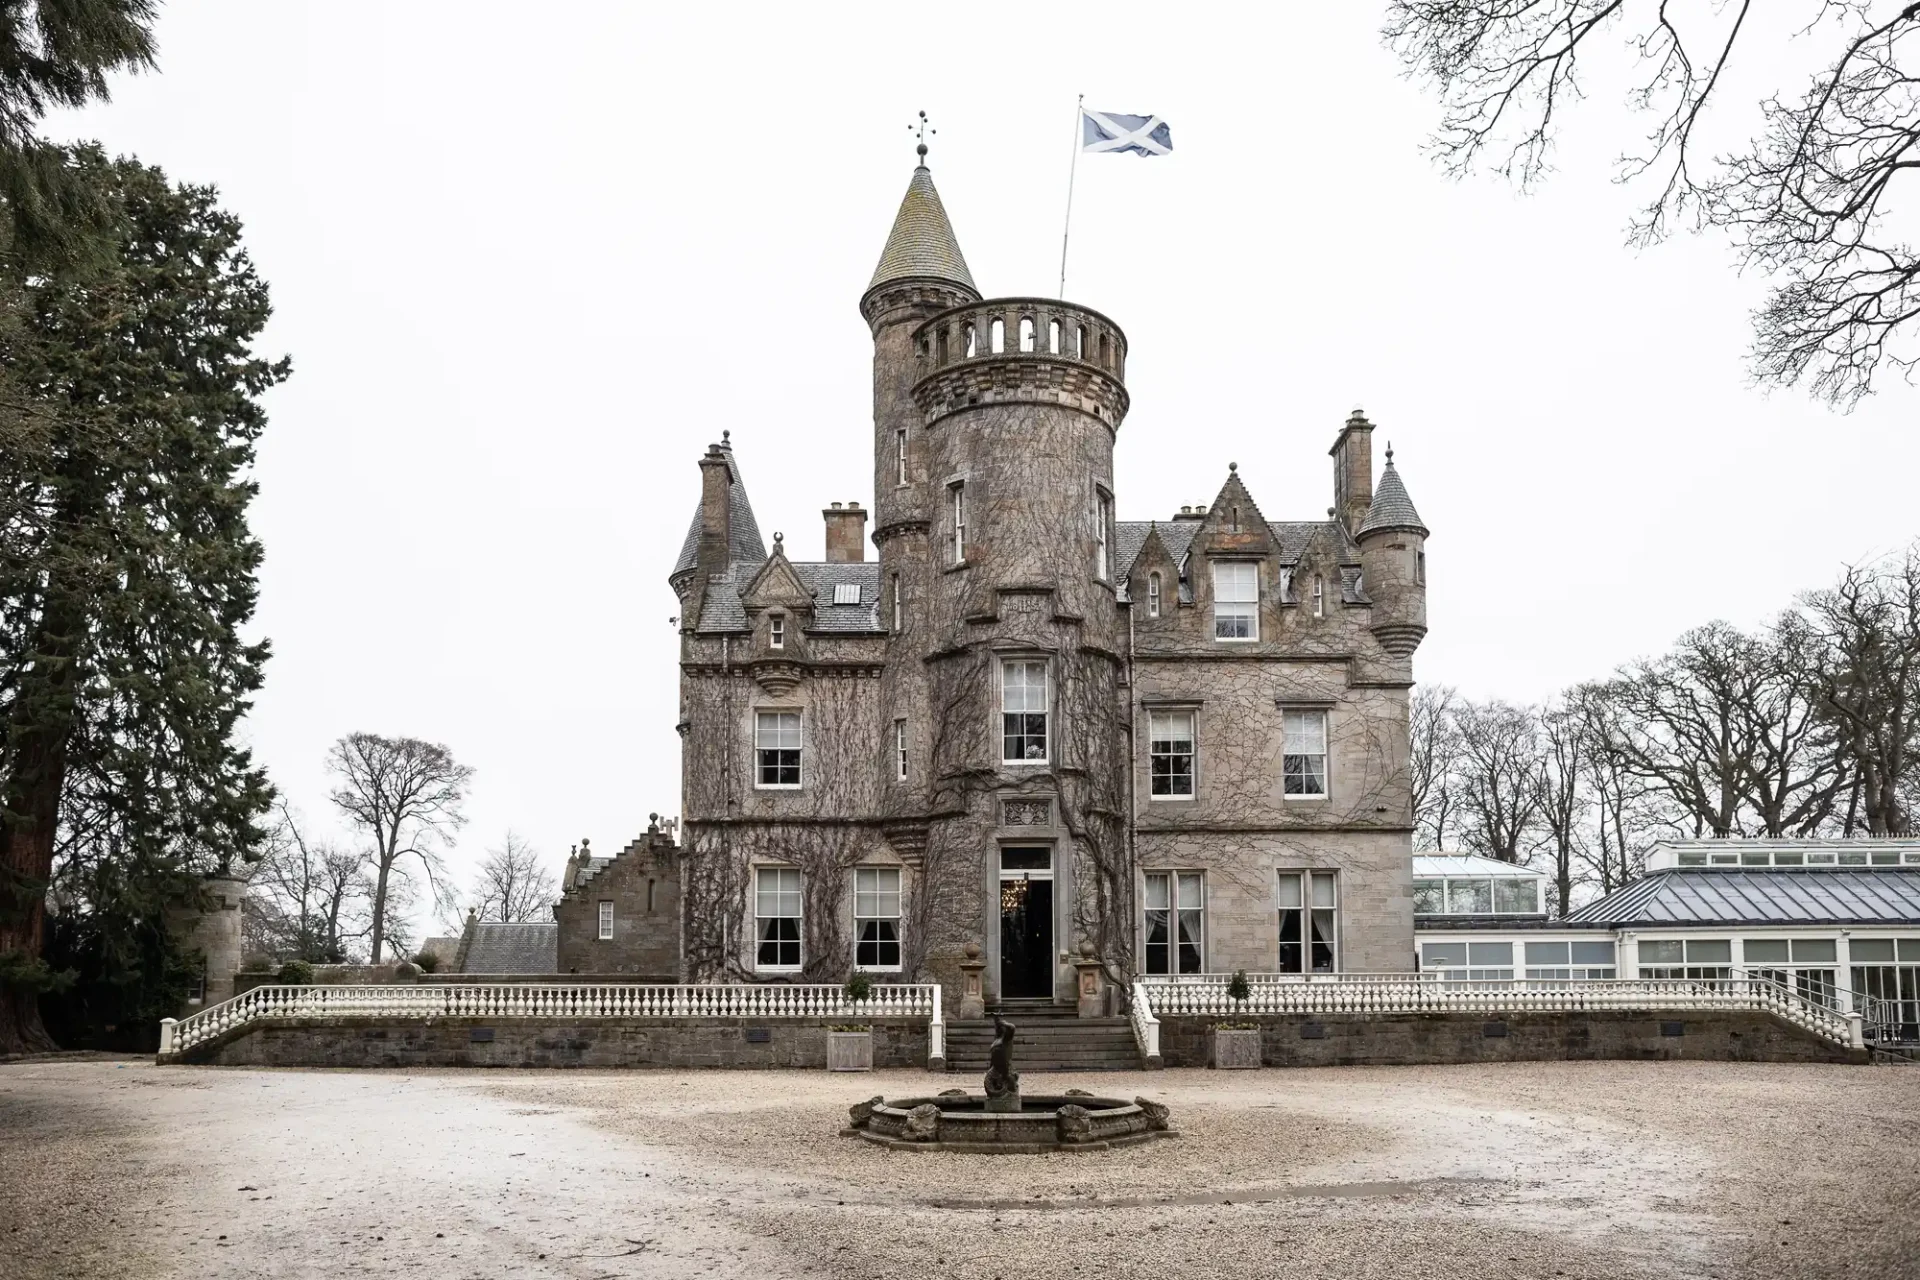 Historic castle with a turret flying the scottish flag, surrounded by bare trees and a gravel driveway.